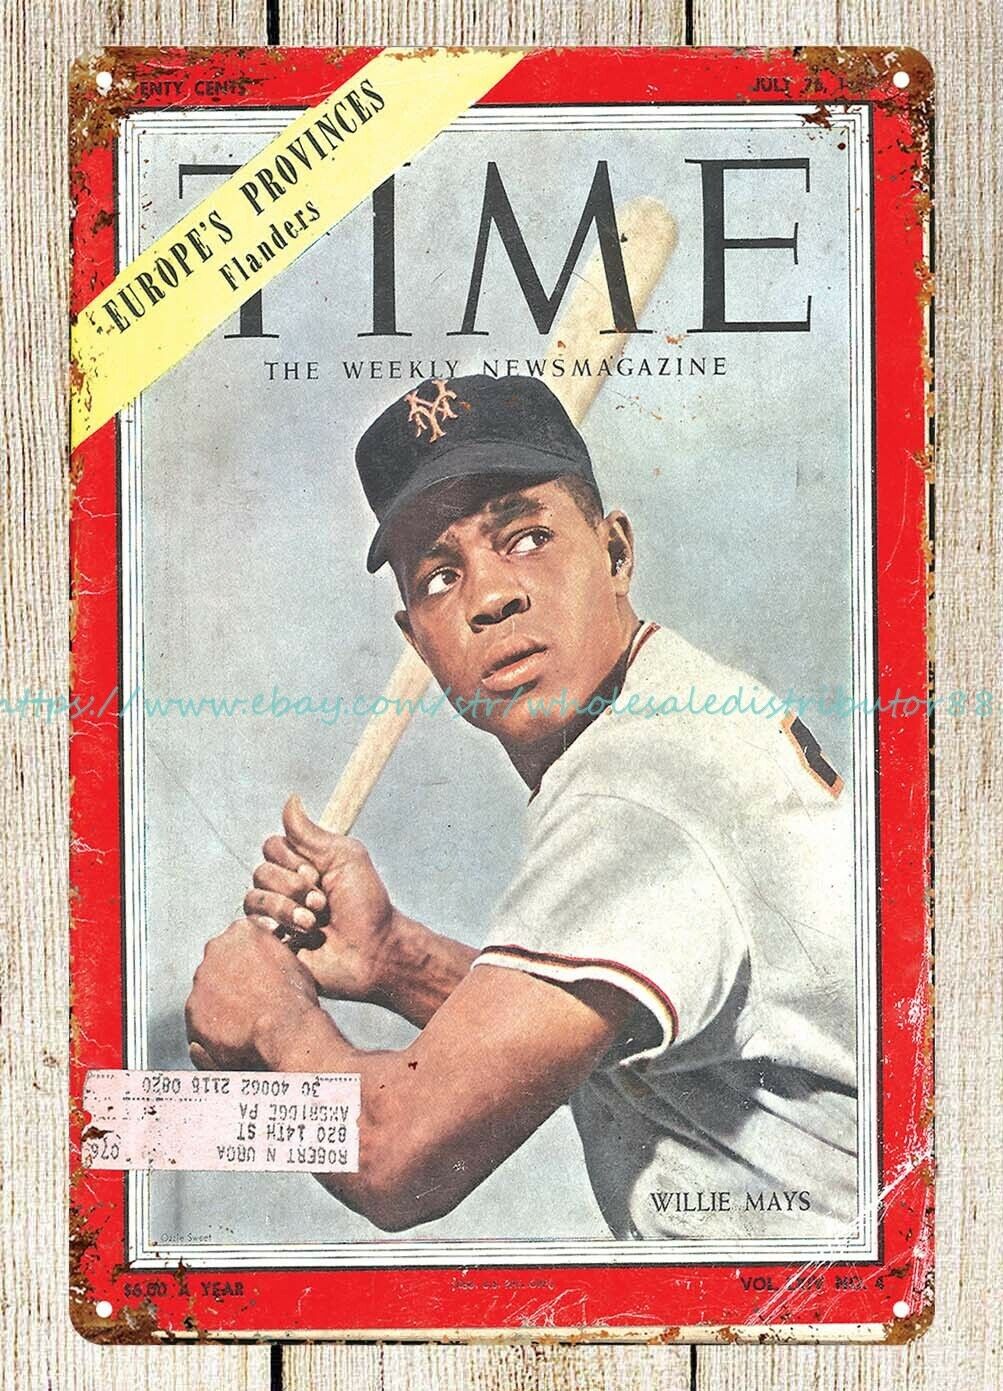 1954 Time magazine cover baseball player Willie Mays metal tin sign cabin decor